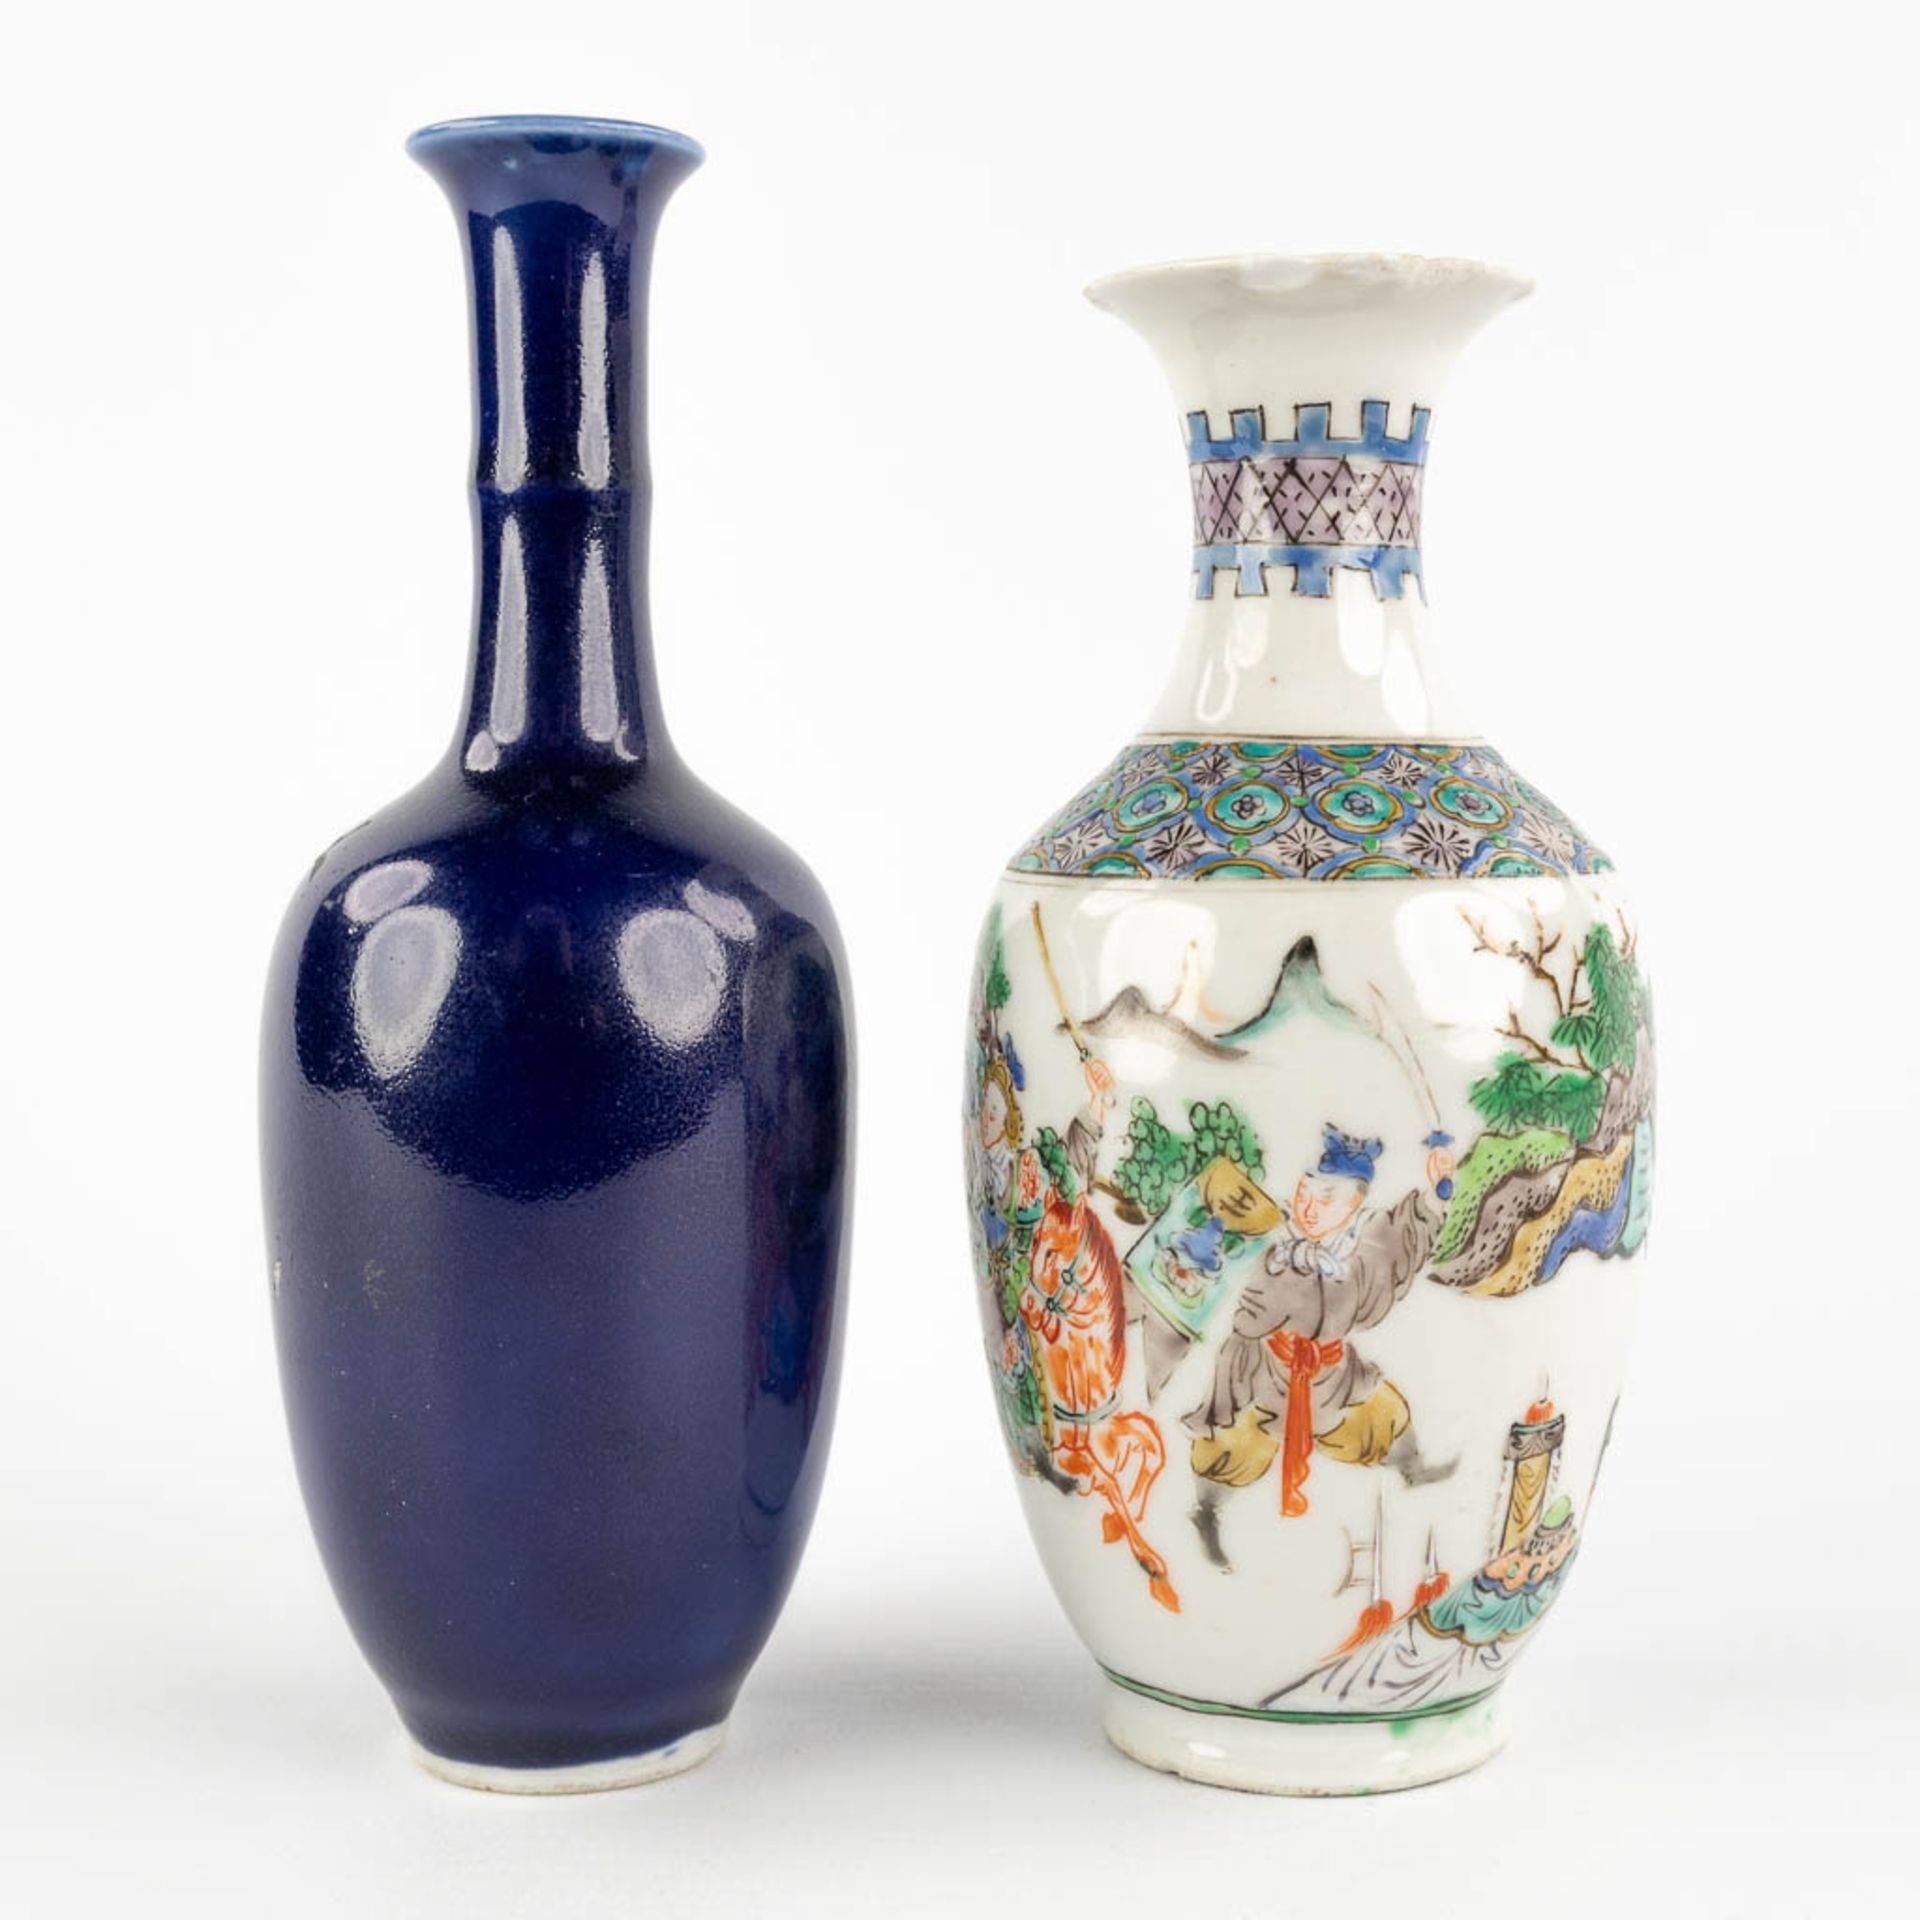 Two small Chinese vases, Famille Verte and monochrome, 19th C. (H:15 x D:7 cm) - Bild 5 aus 11